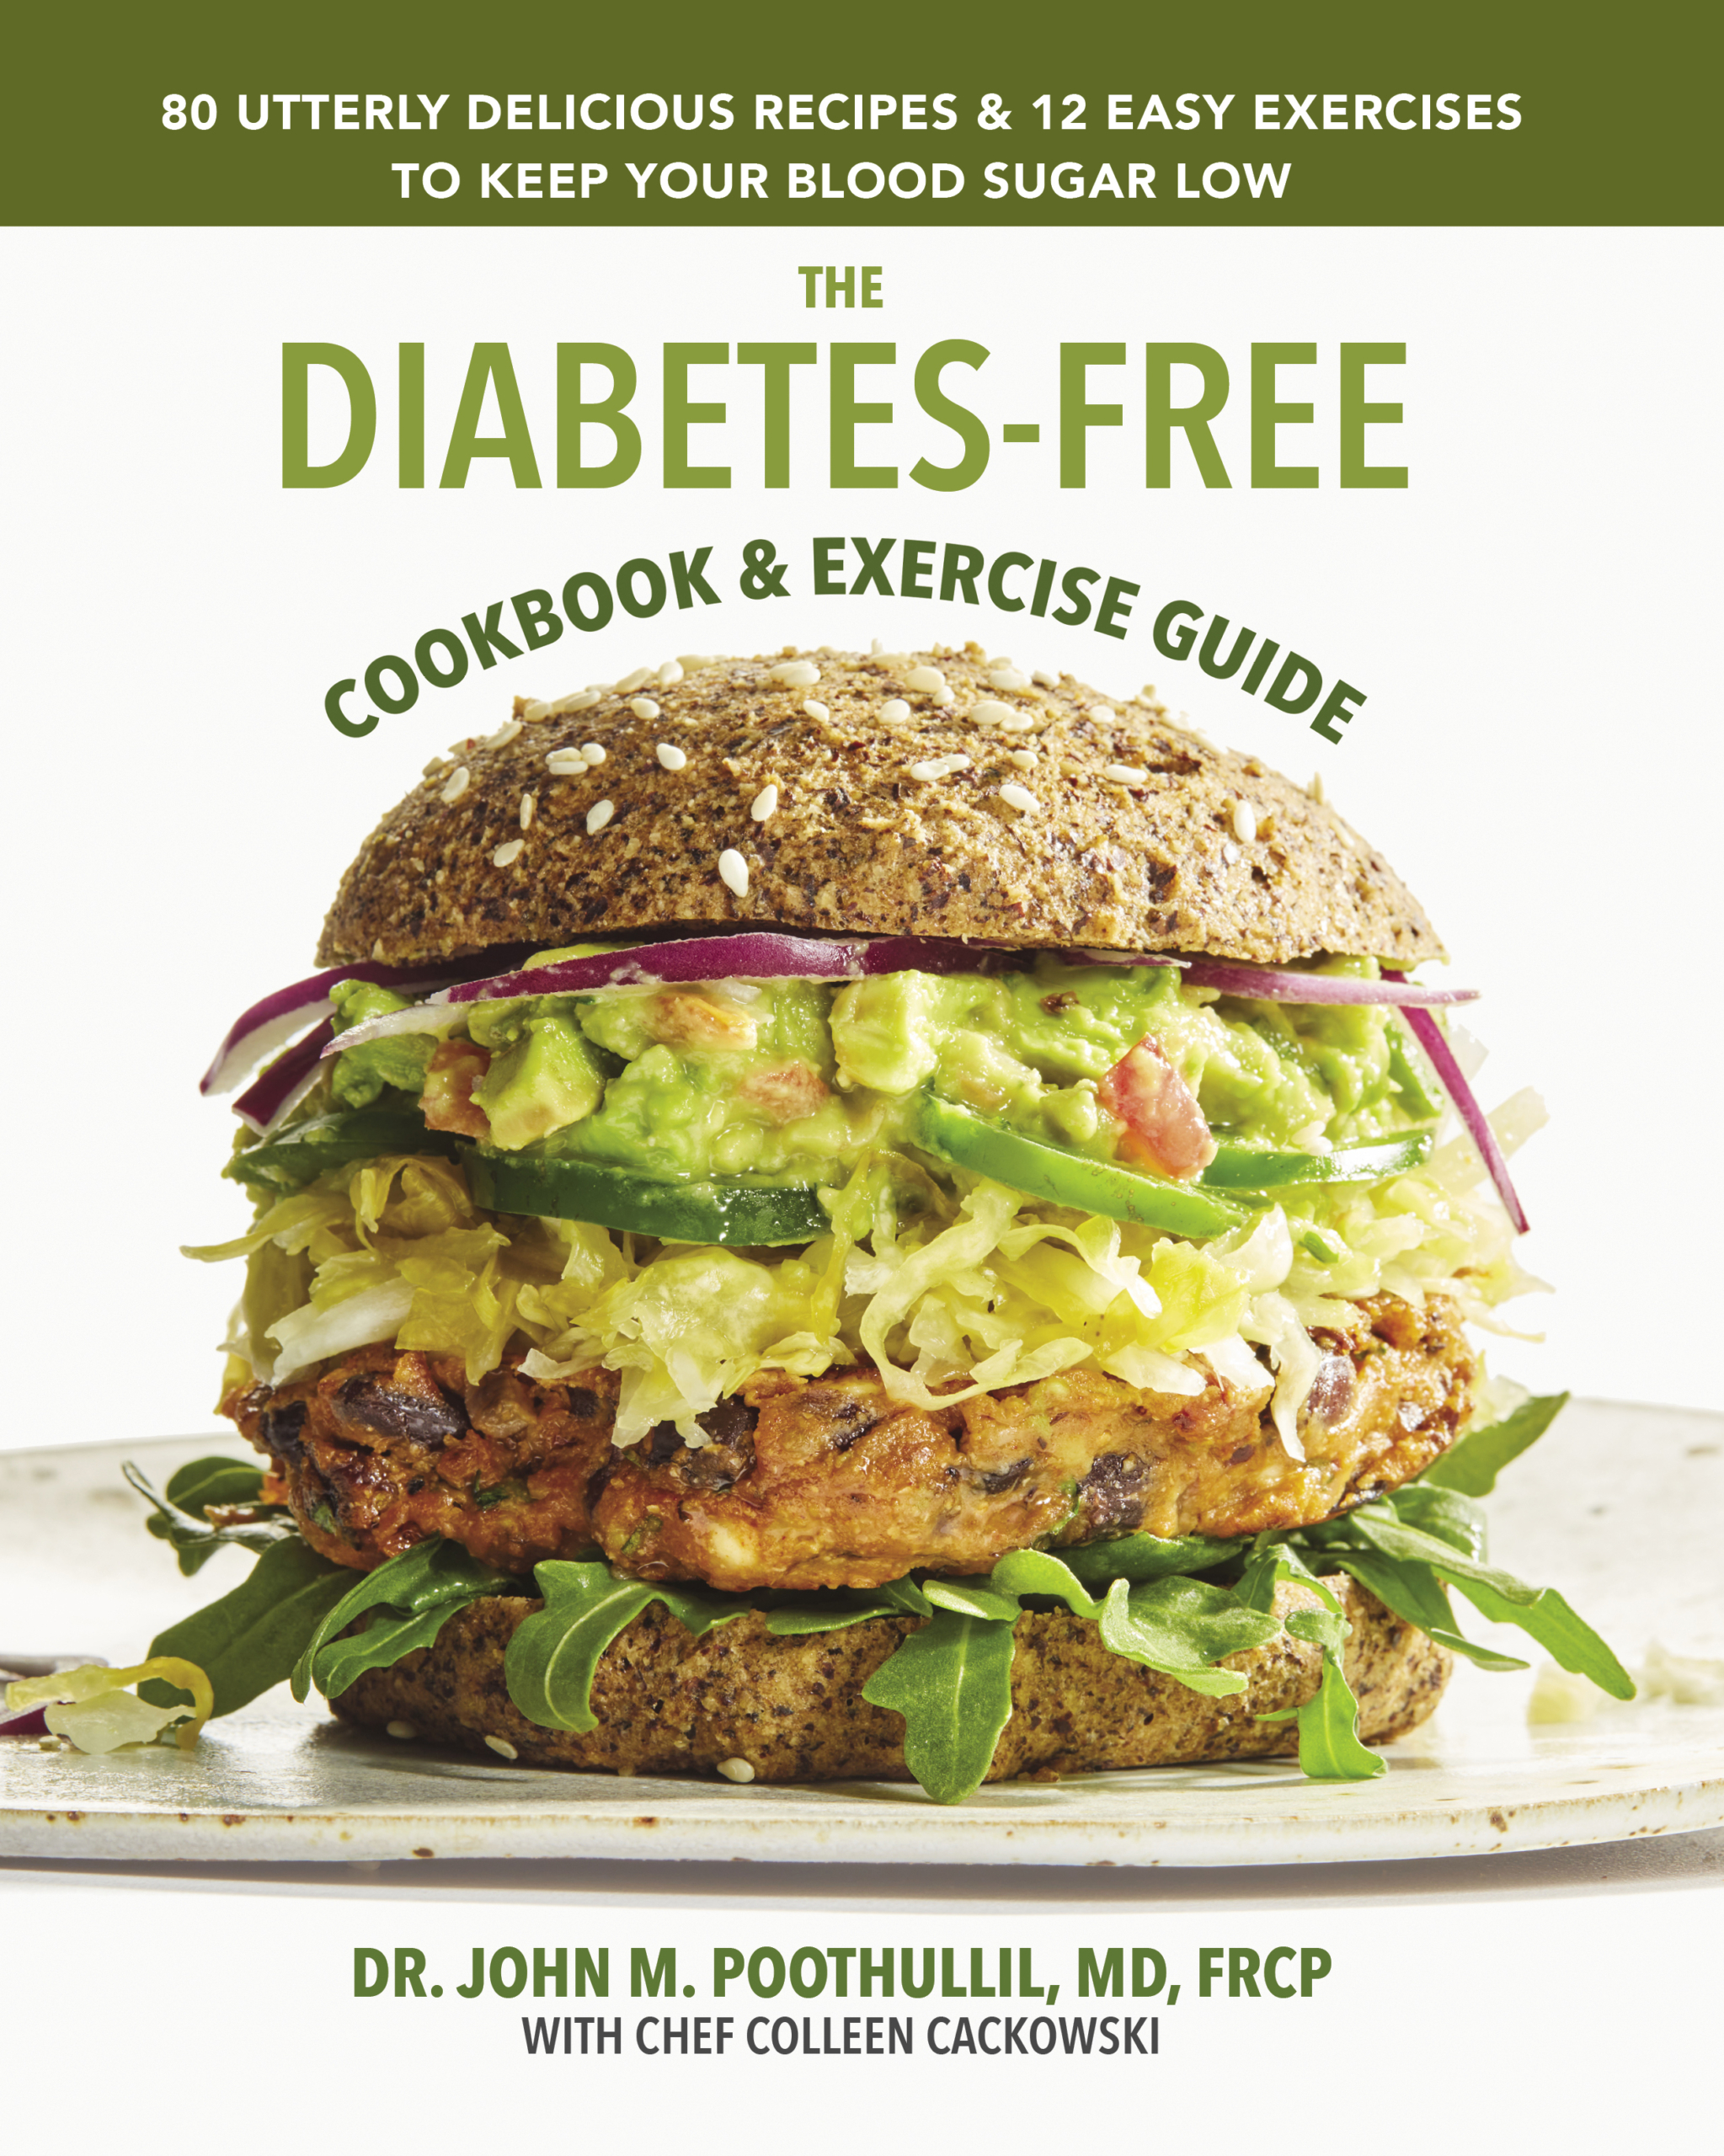 The Diabetes-Free Cookbook & Exercise Guide